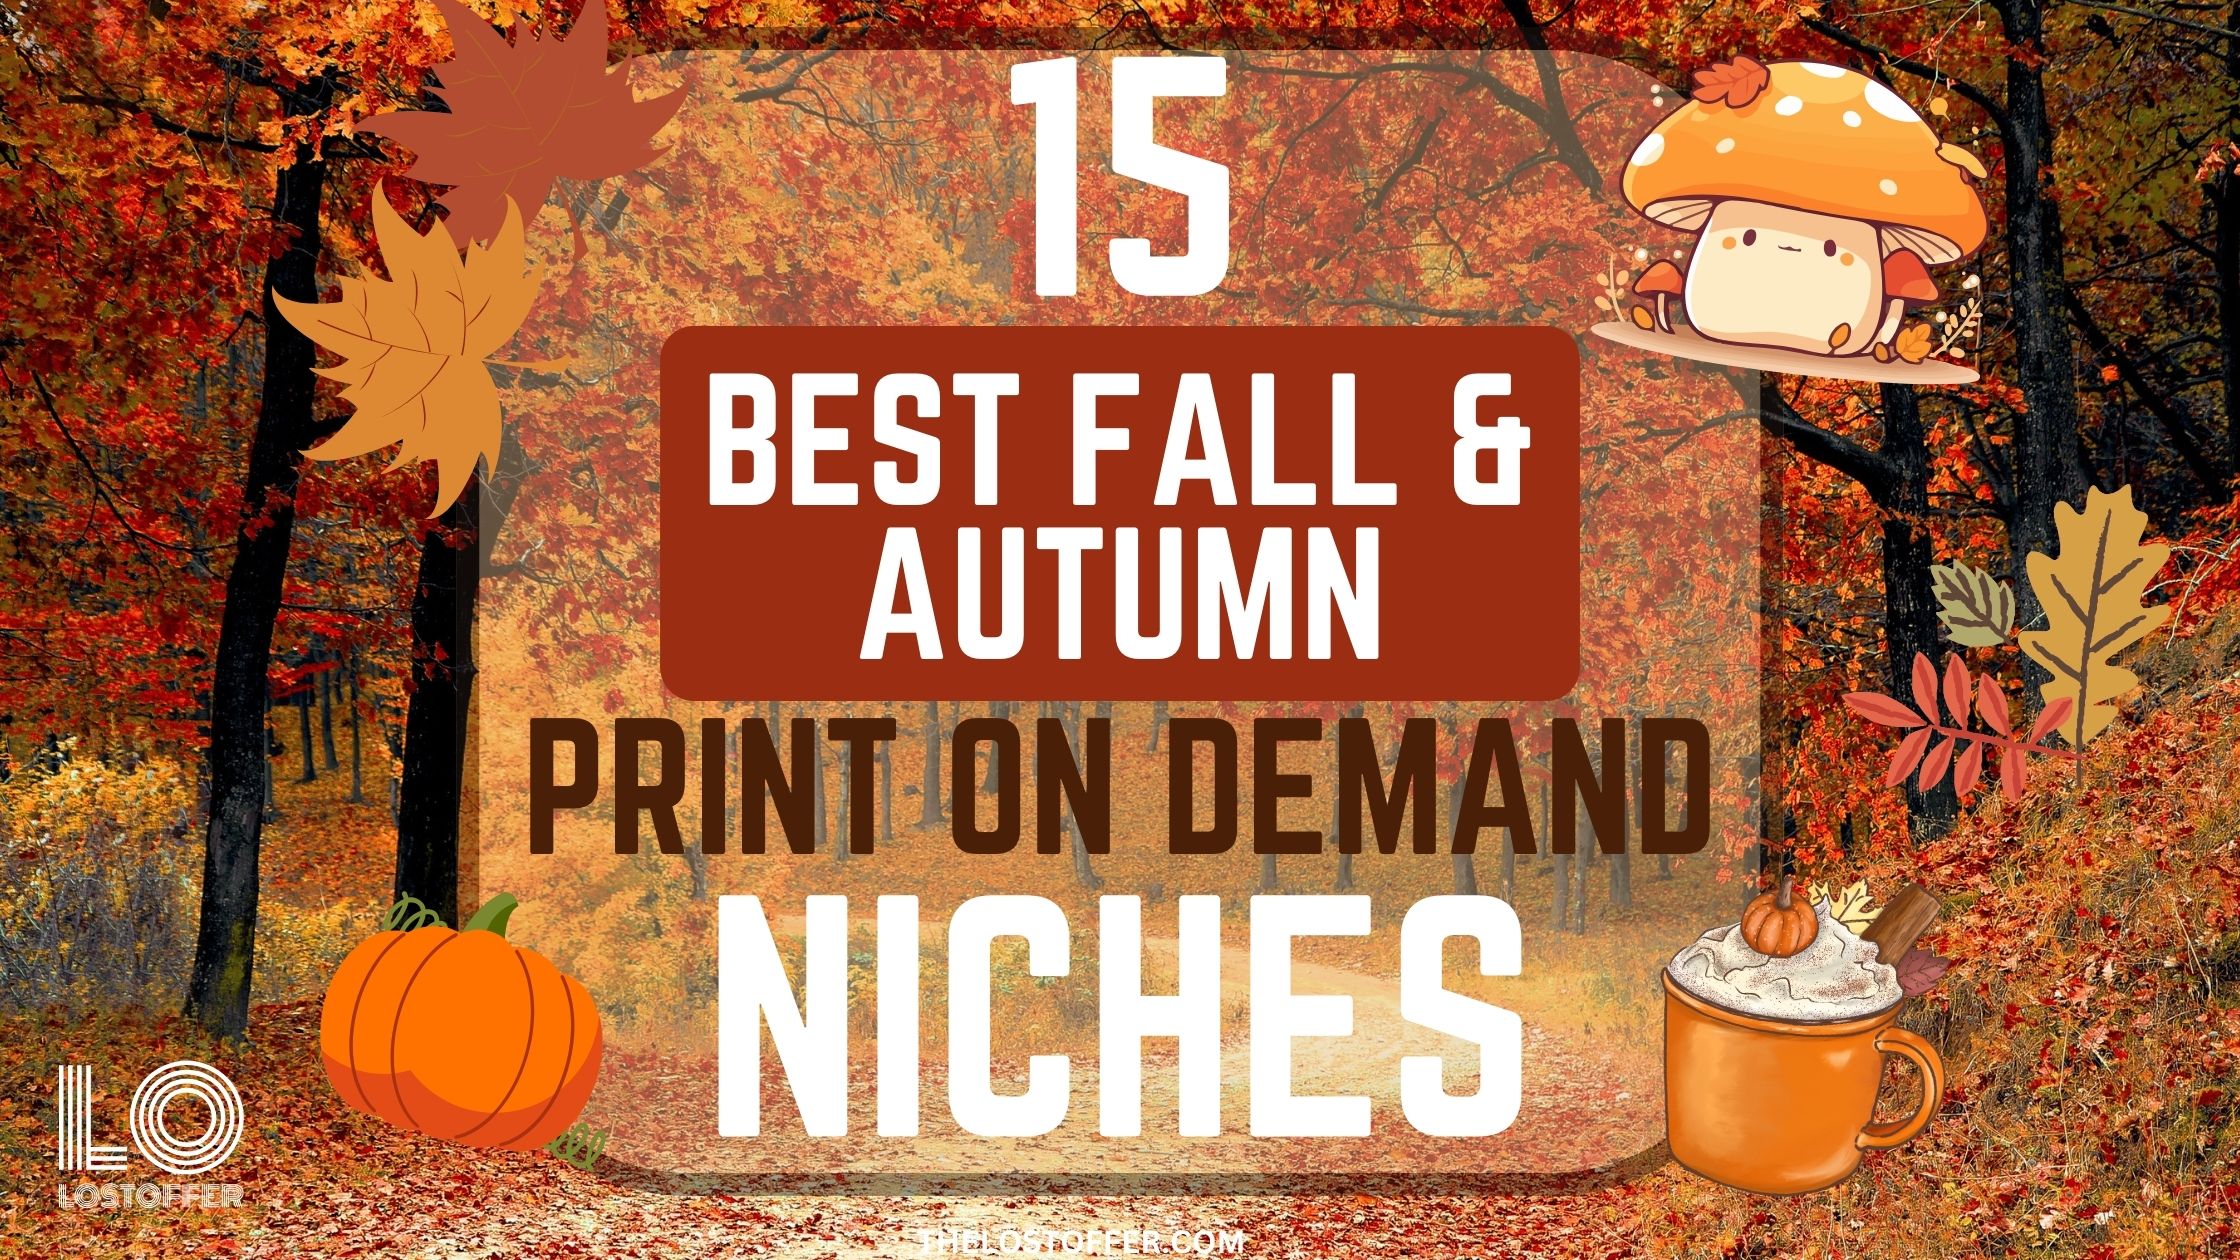 15 BEST FALL & AUTUMN NICHES FOR PRINT ON DEMAND - THELOSTOFFER